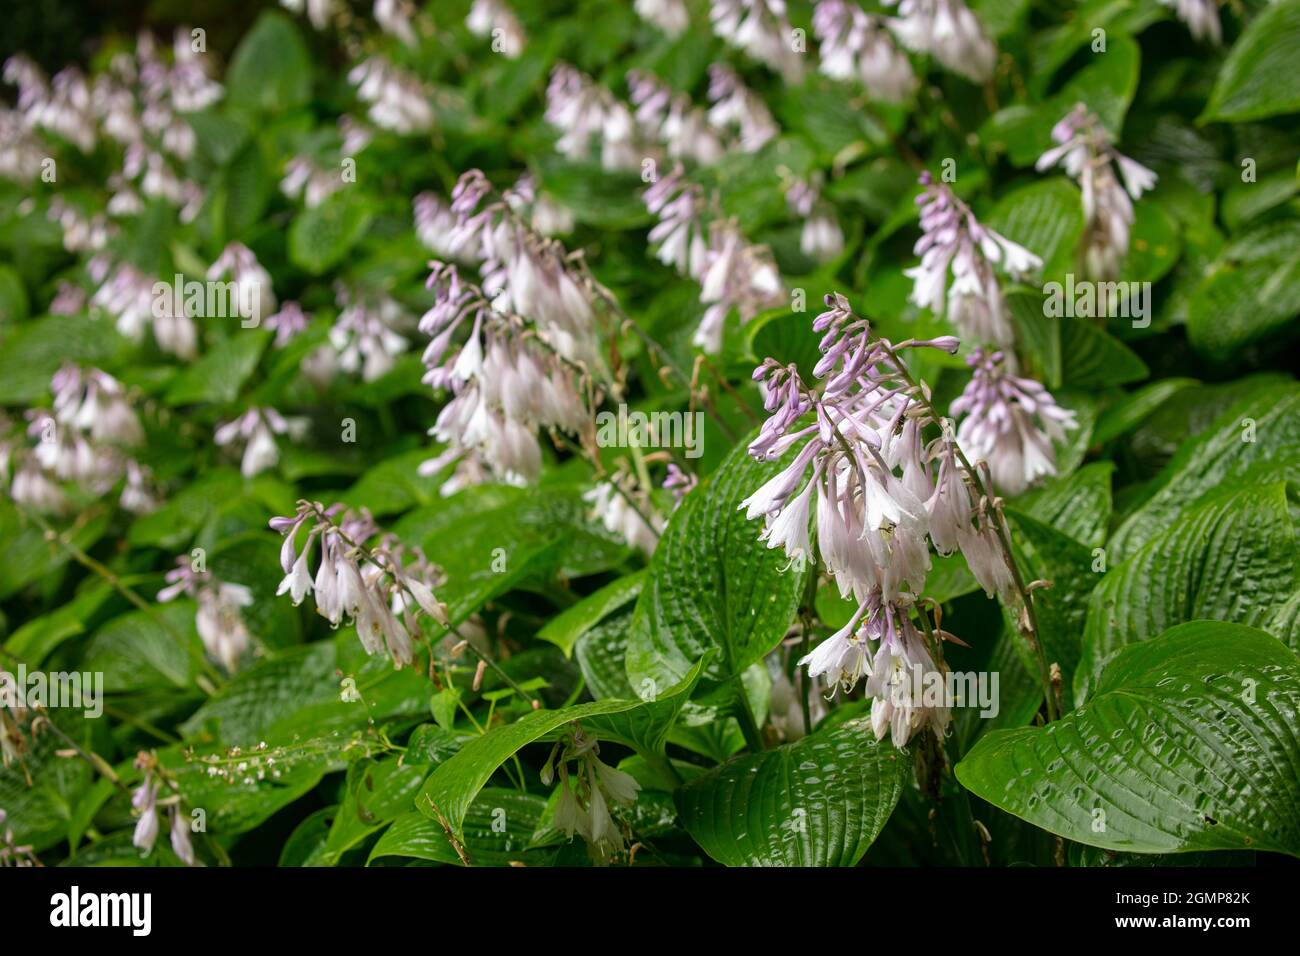 Interesting Hosta rectifolia, straight-leaved plantain lily flowering, natural plant portrait in close-up Stock Photo